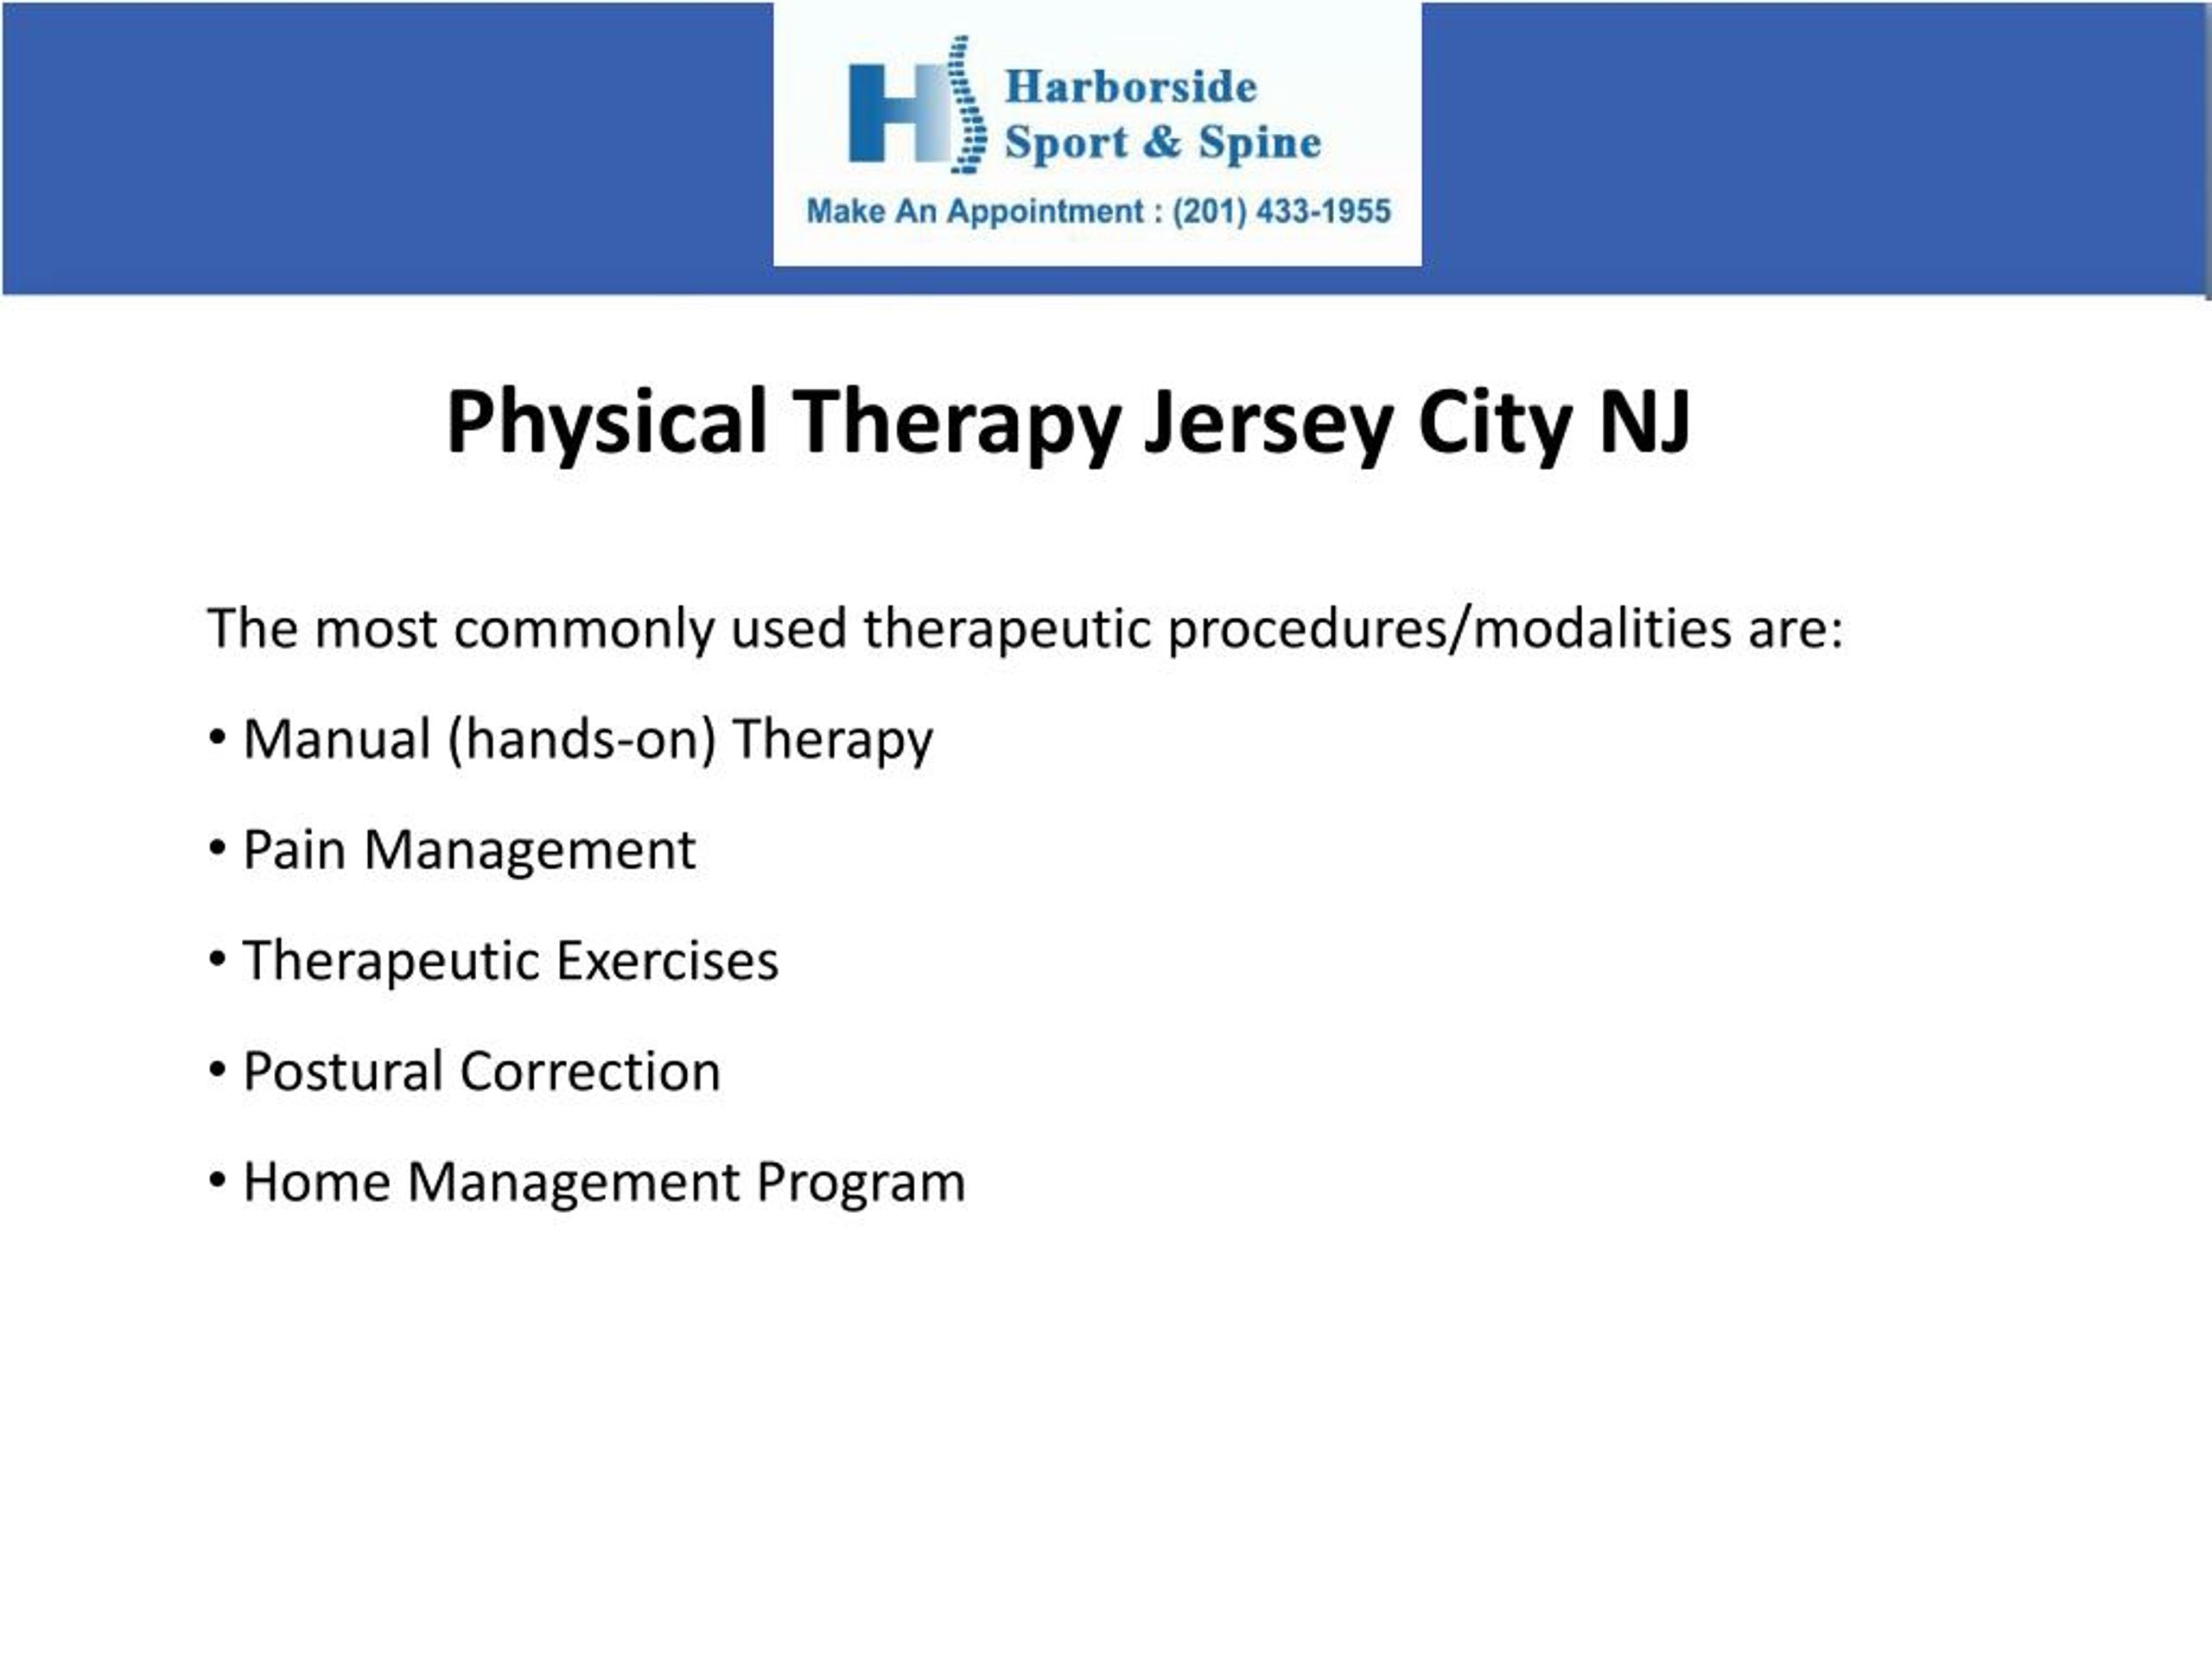 Ppt Get Physical Therapy Jersey City Nj From Licensed Professionals At Harborside Sports 